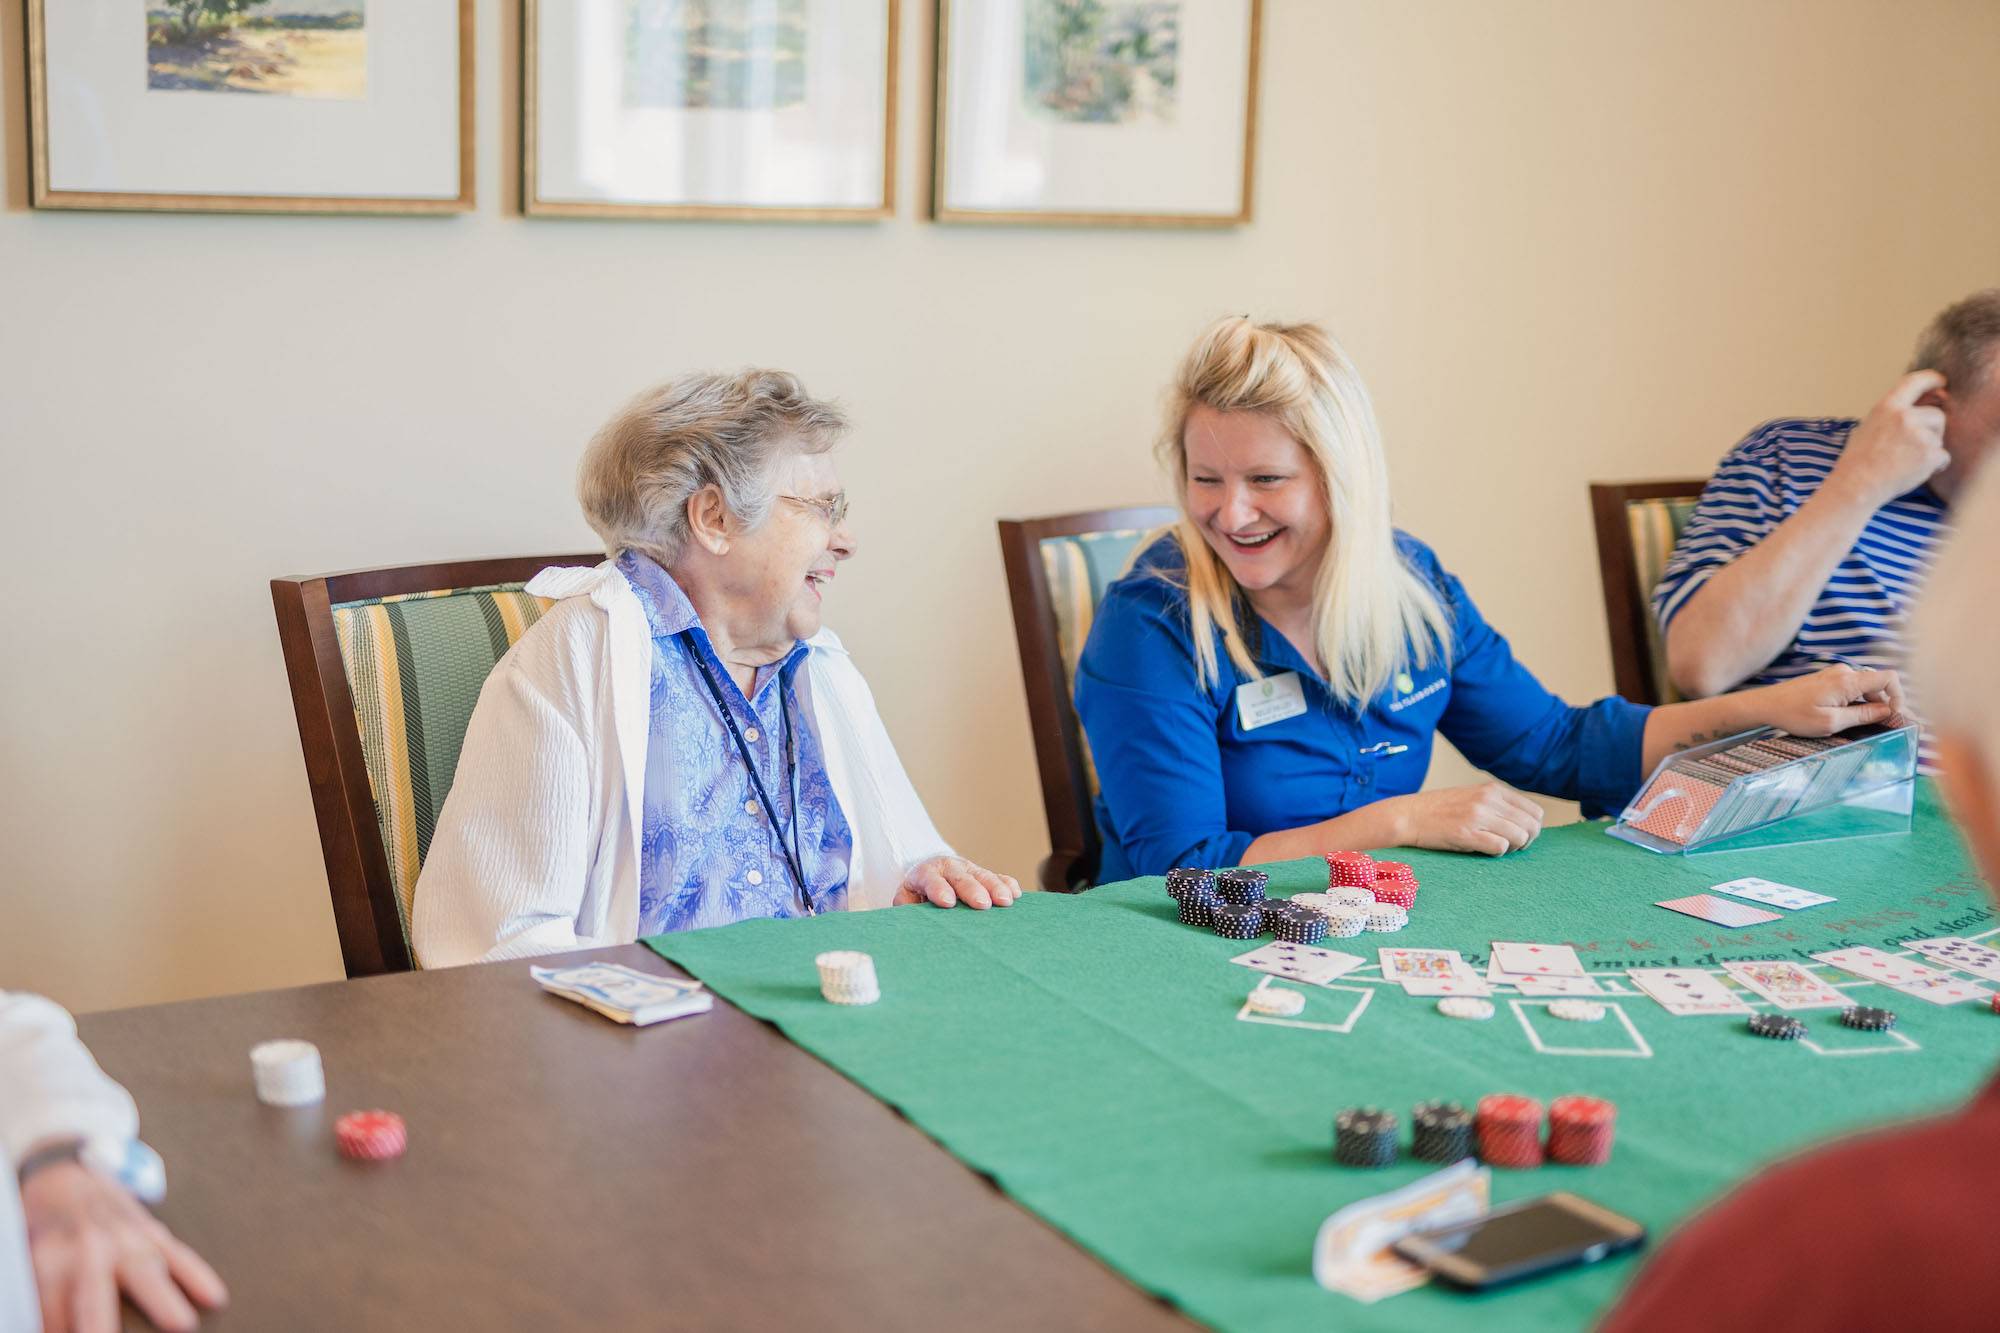 The Preserve at Meridian senior resident and employee playing cards in the game room